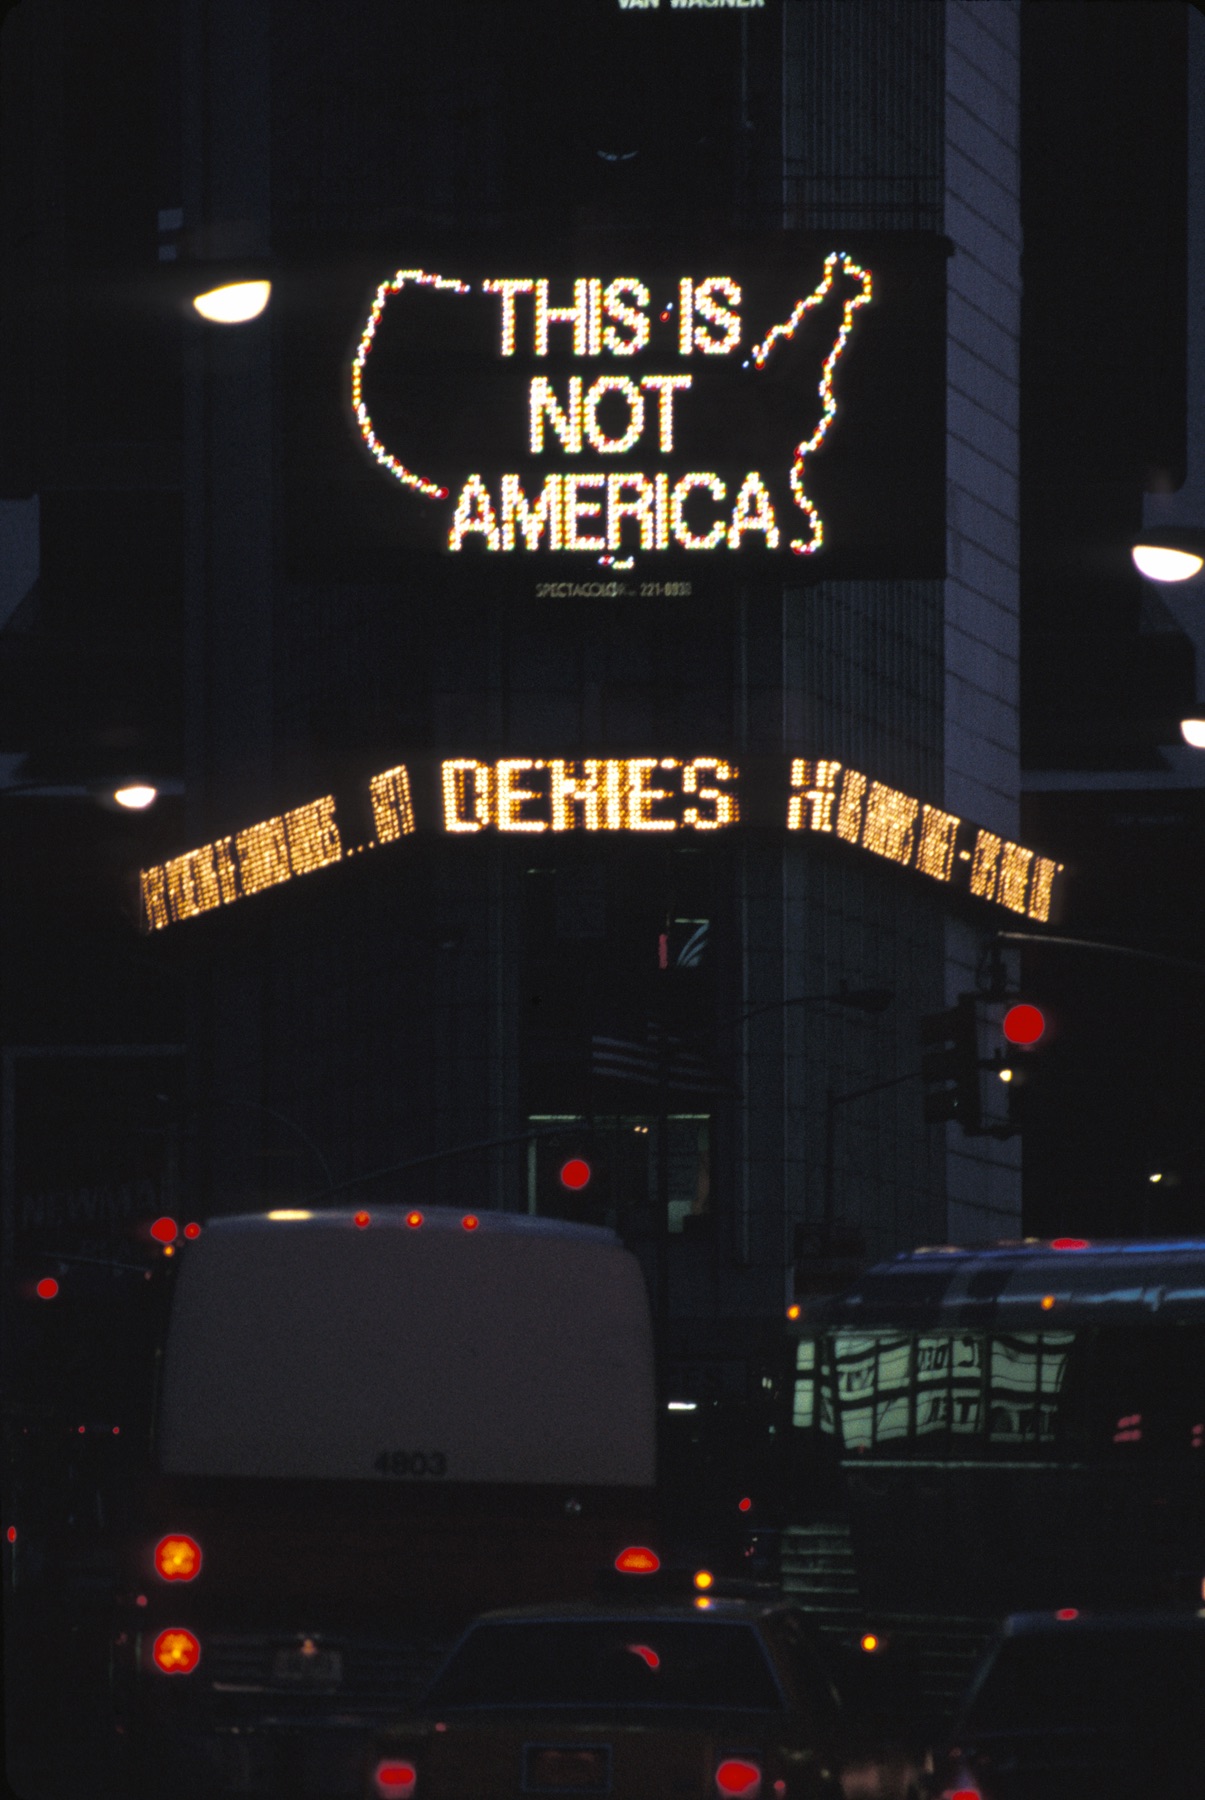 Alfredo Jaar. A Logo for America, 1987-2014. Public intervention. Digital animation commissioned by The Public Art Fund for Spectacolor sign, Times Square, New York, April 1987. Courtesy of the artist and Times Square Alliance, New York.